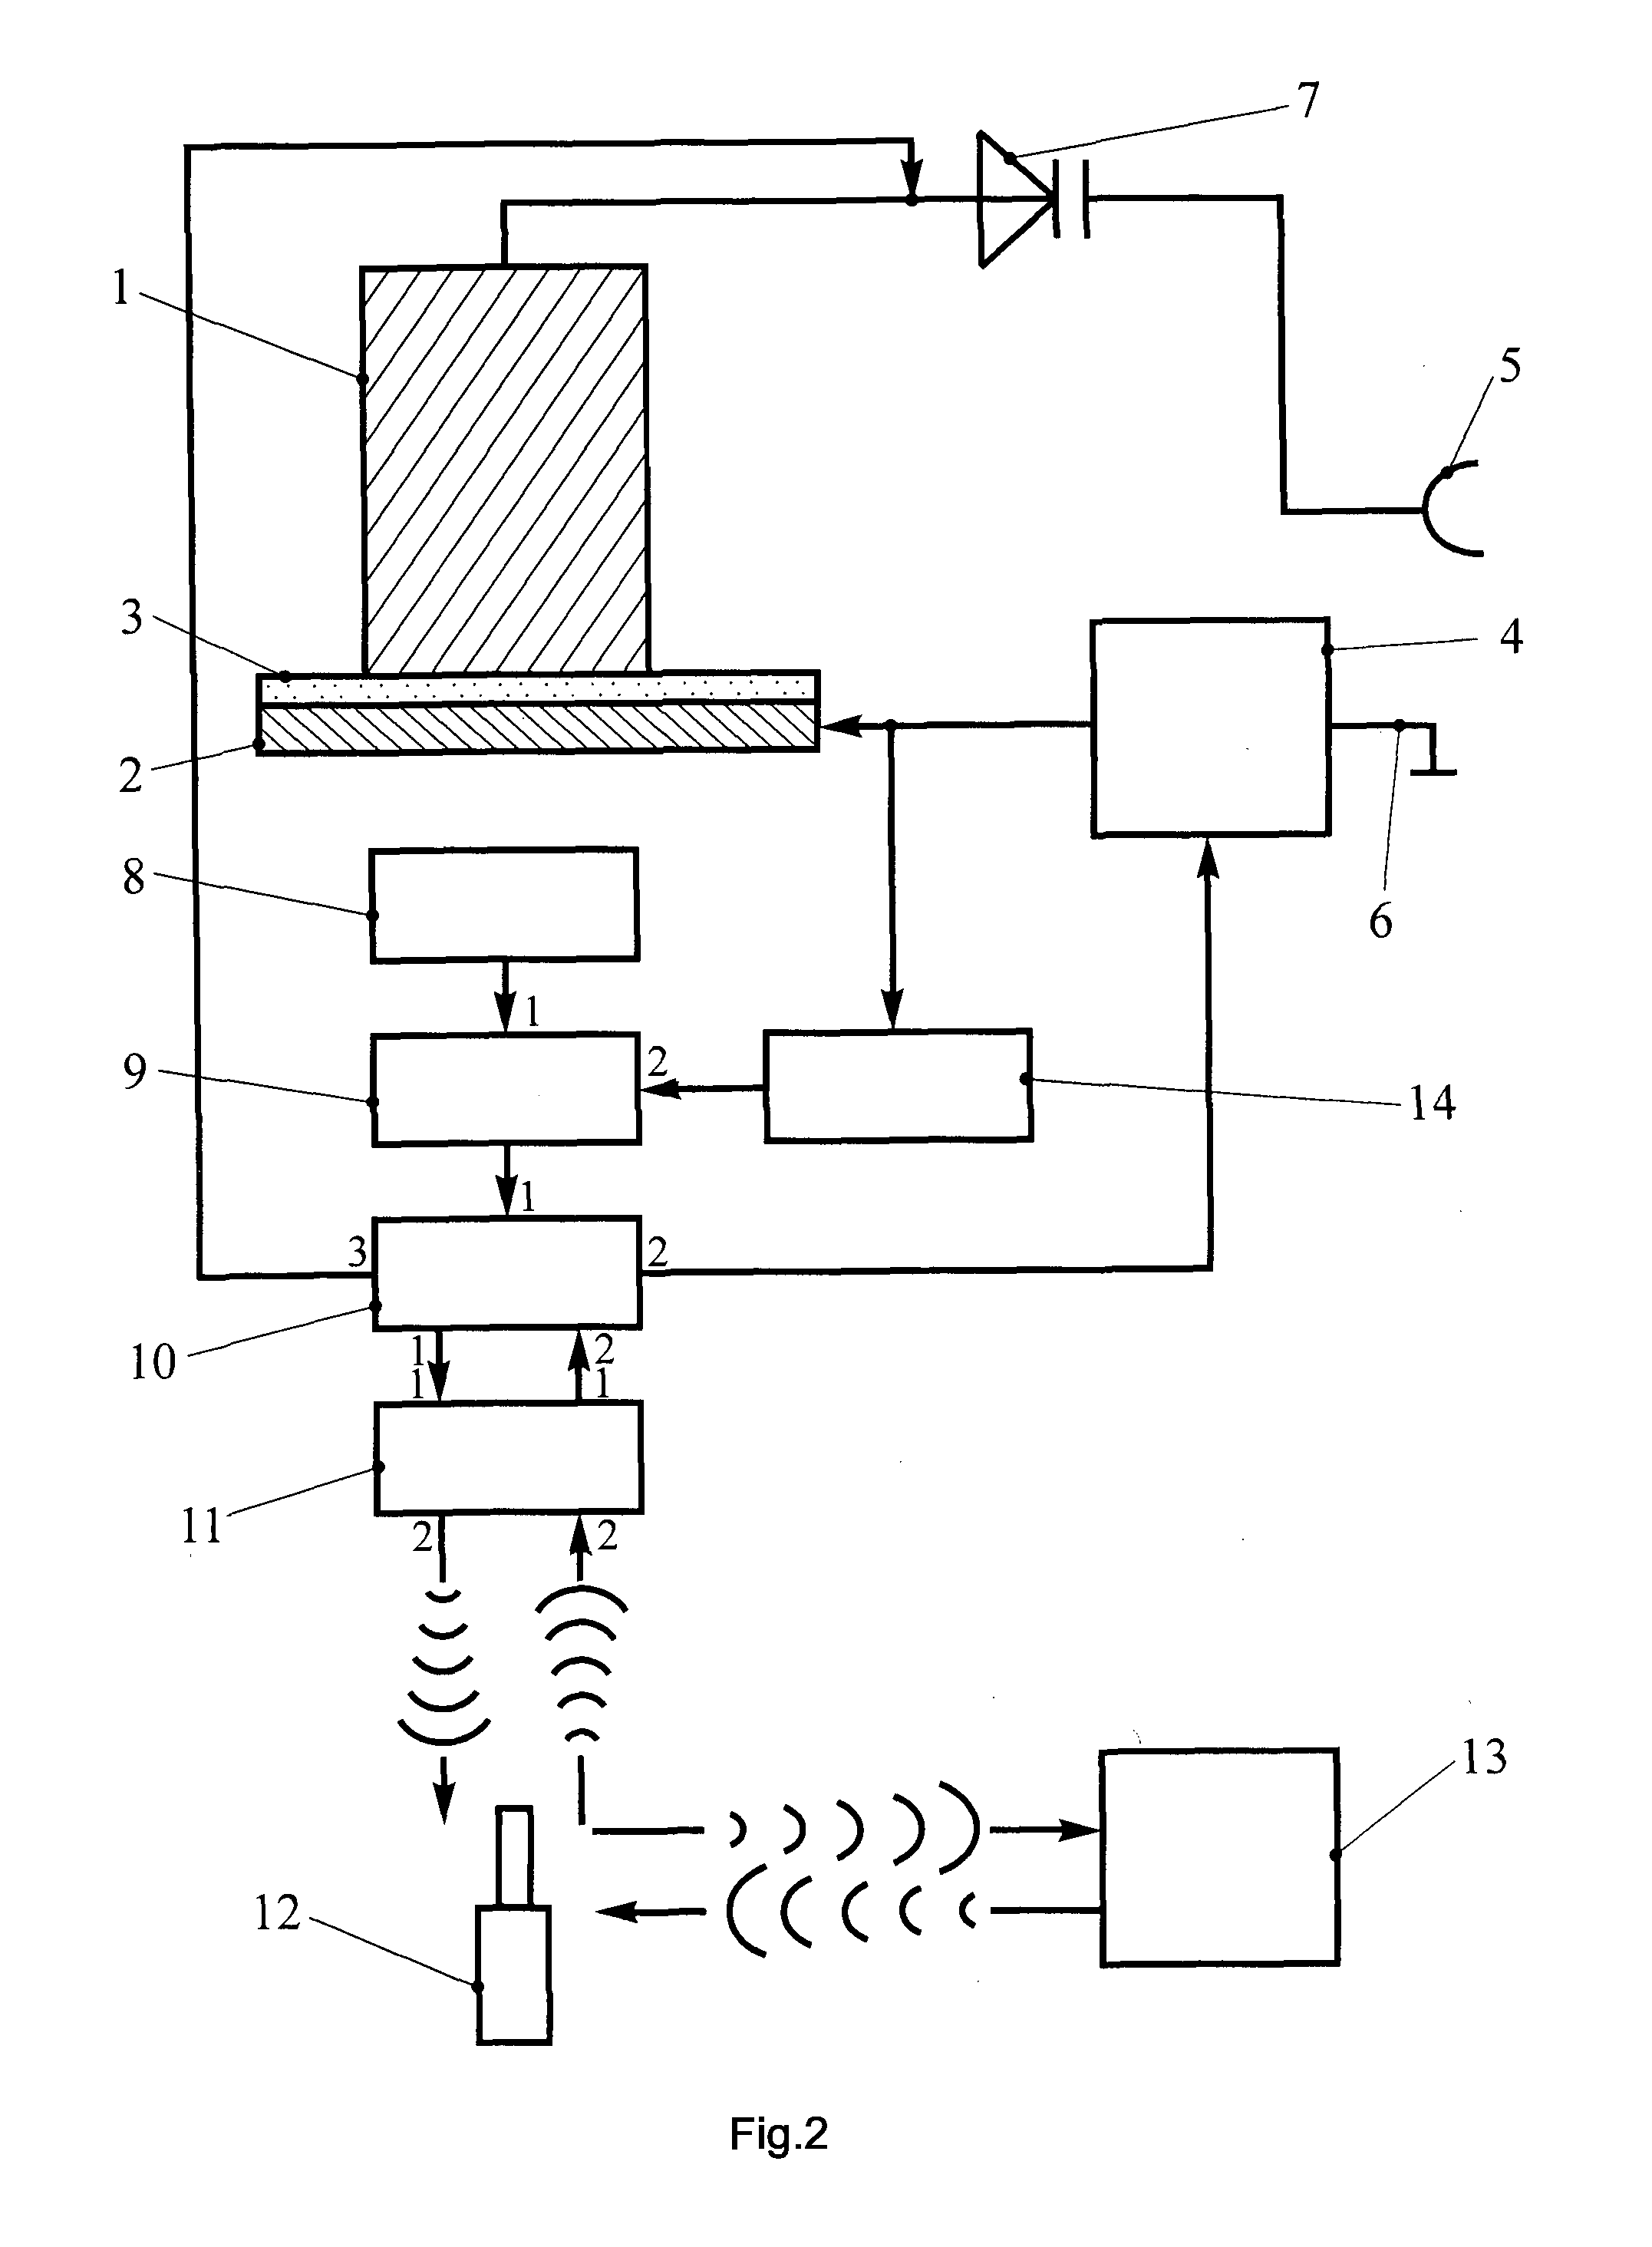 Device for measuring electromagnetic field intensity